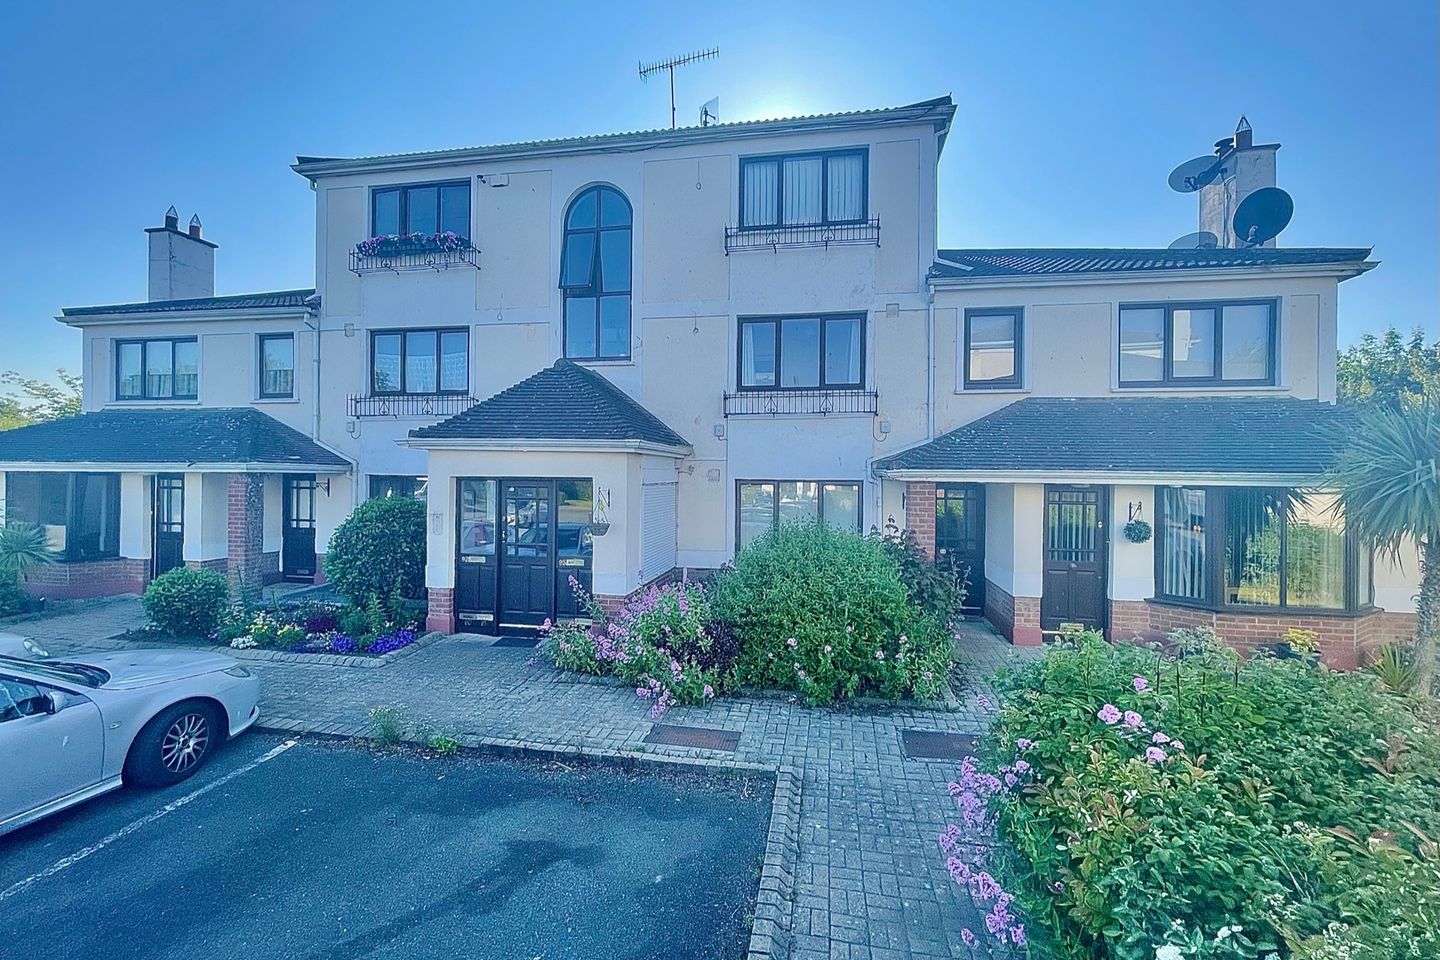 Apartment 94, Turvey Woods, Donabate, Co. Dublin